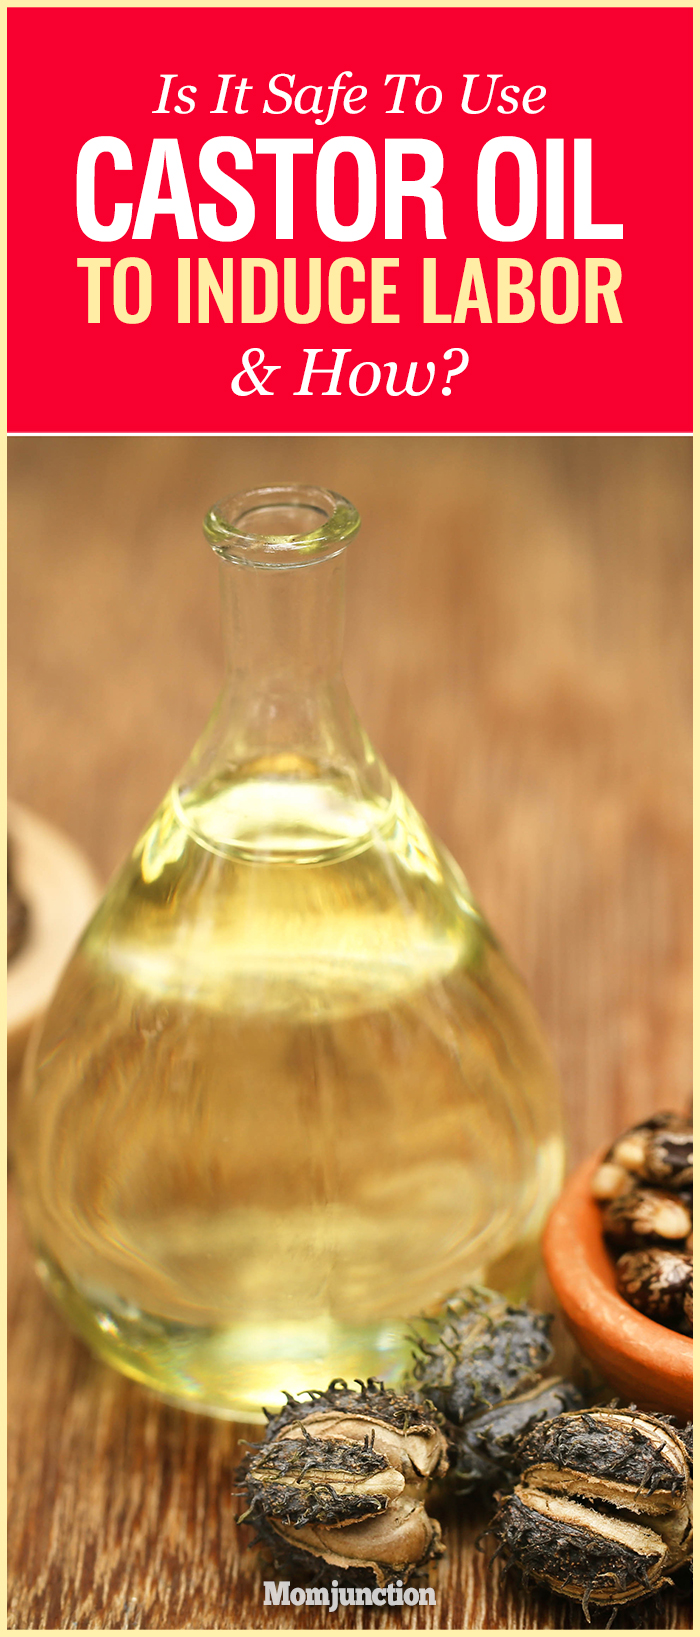 How Effective Is Castor Oil To Induce Labor?